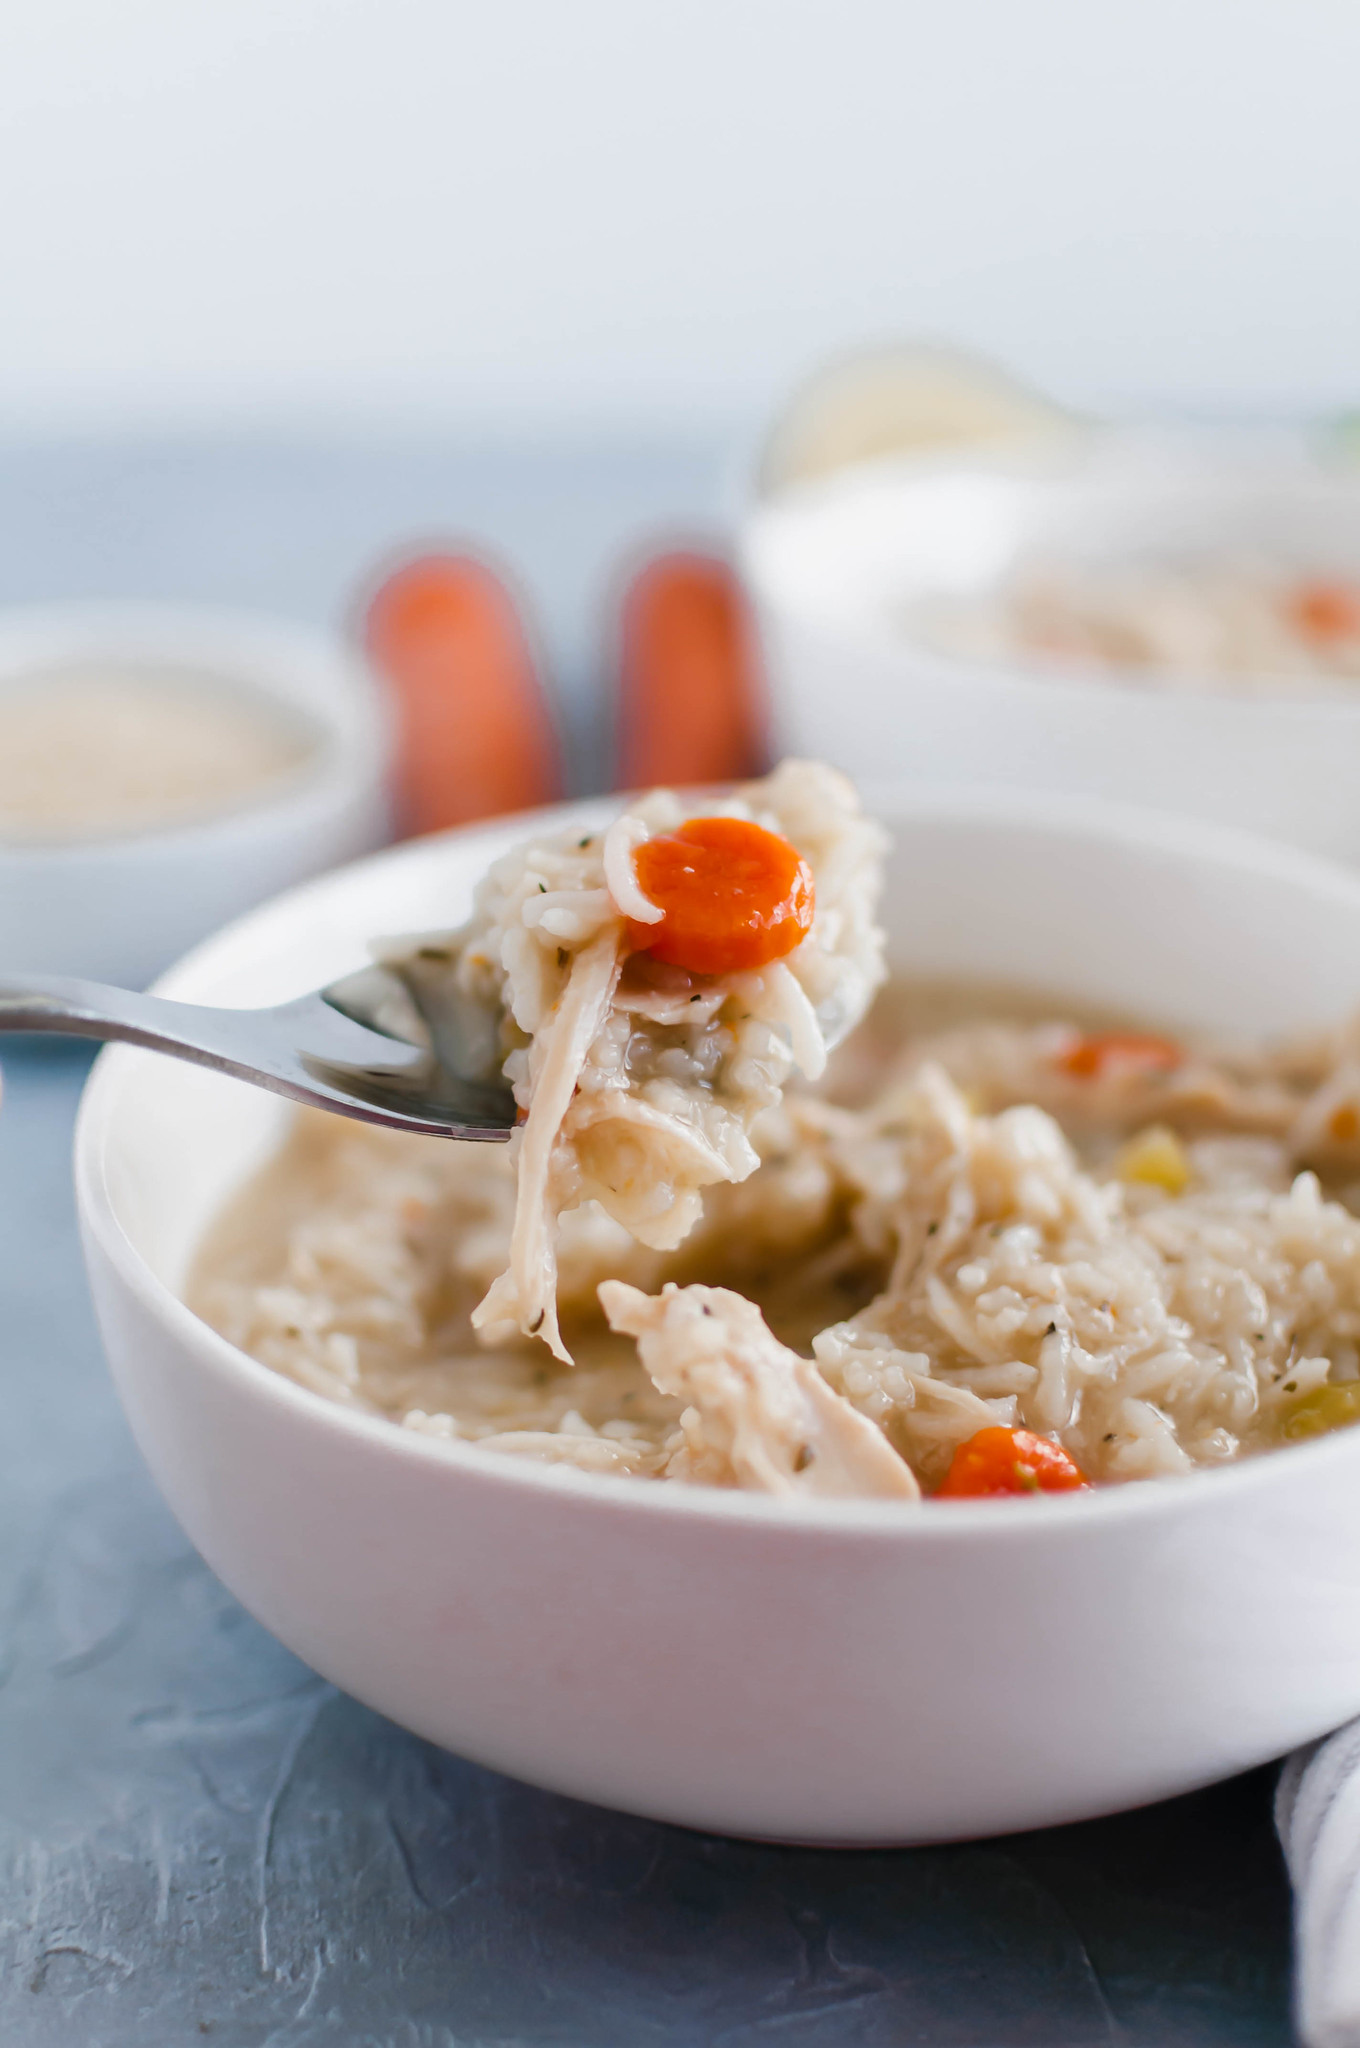 Need something warm and cozy? Feeling under the weather? This Instant Pot Chicken Rice Soup is the perfect soup to warm you up or help heal you. Simple ingredients, simple preparation and just a few minutes until soup is on the table.